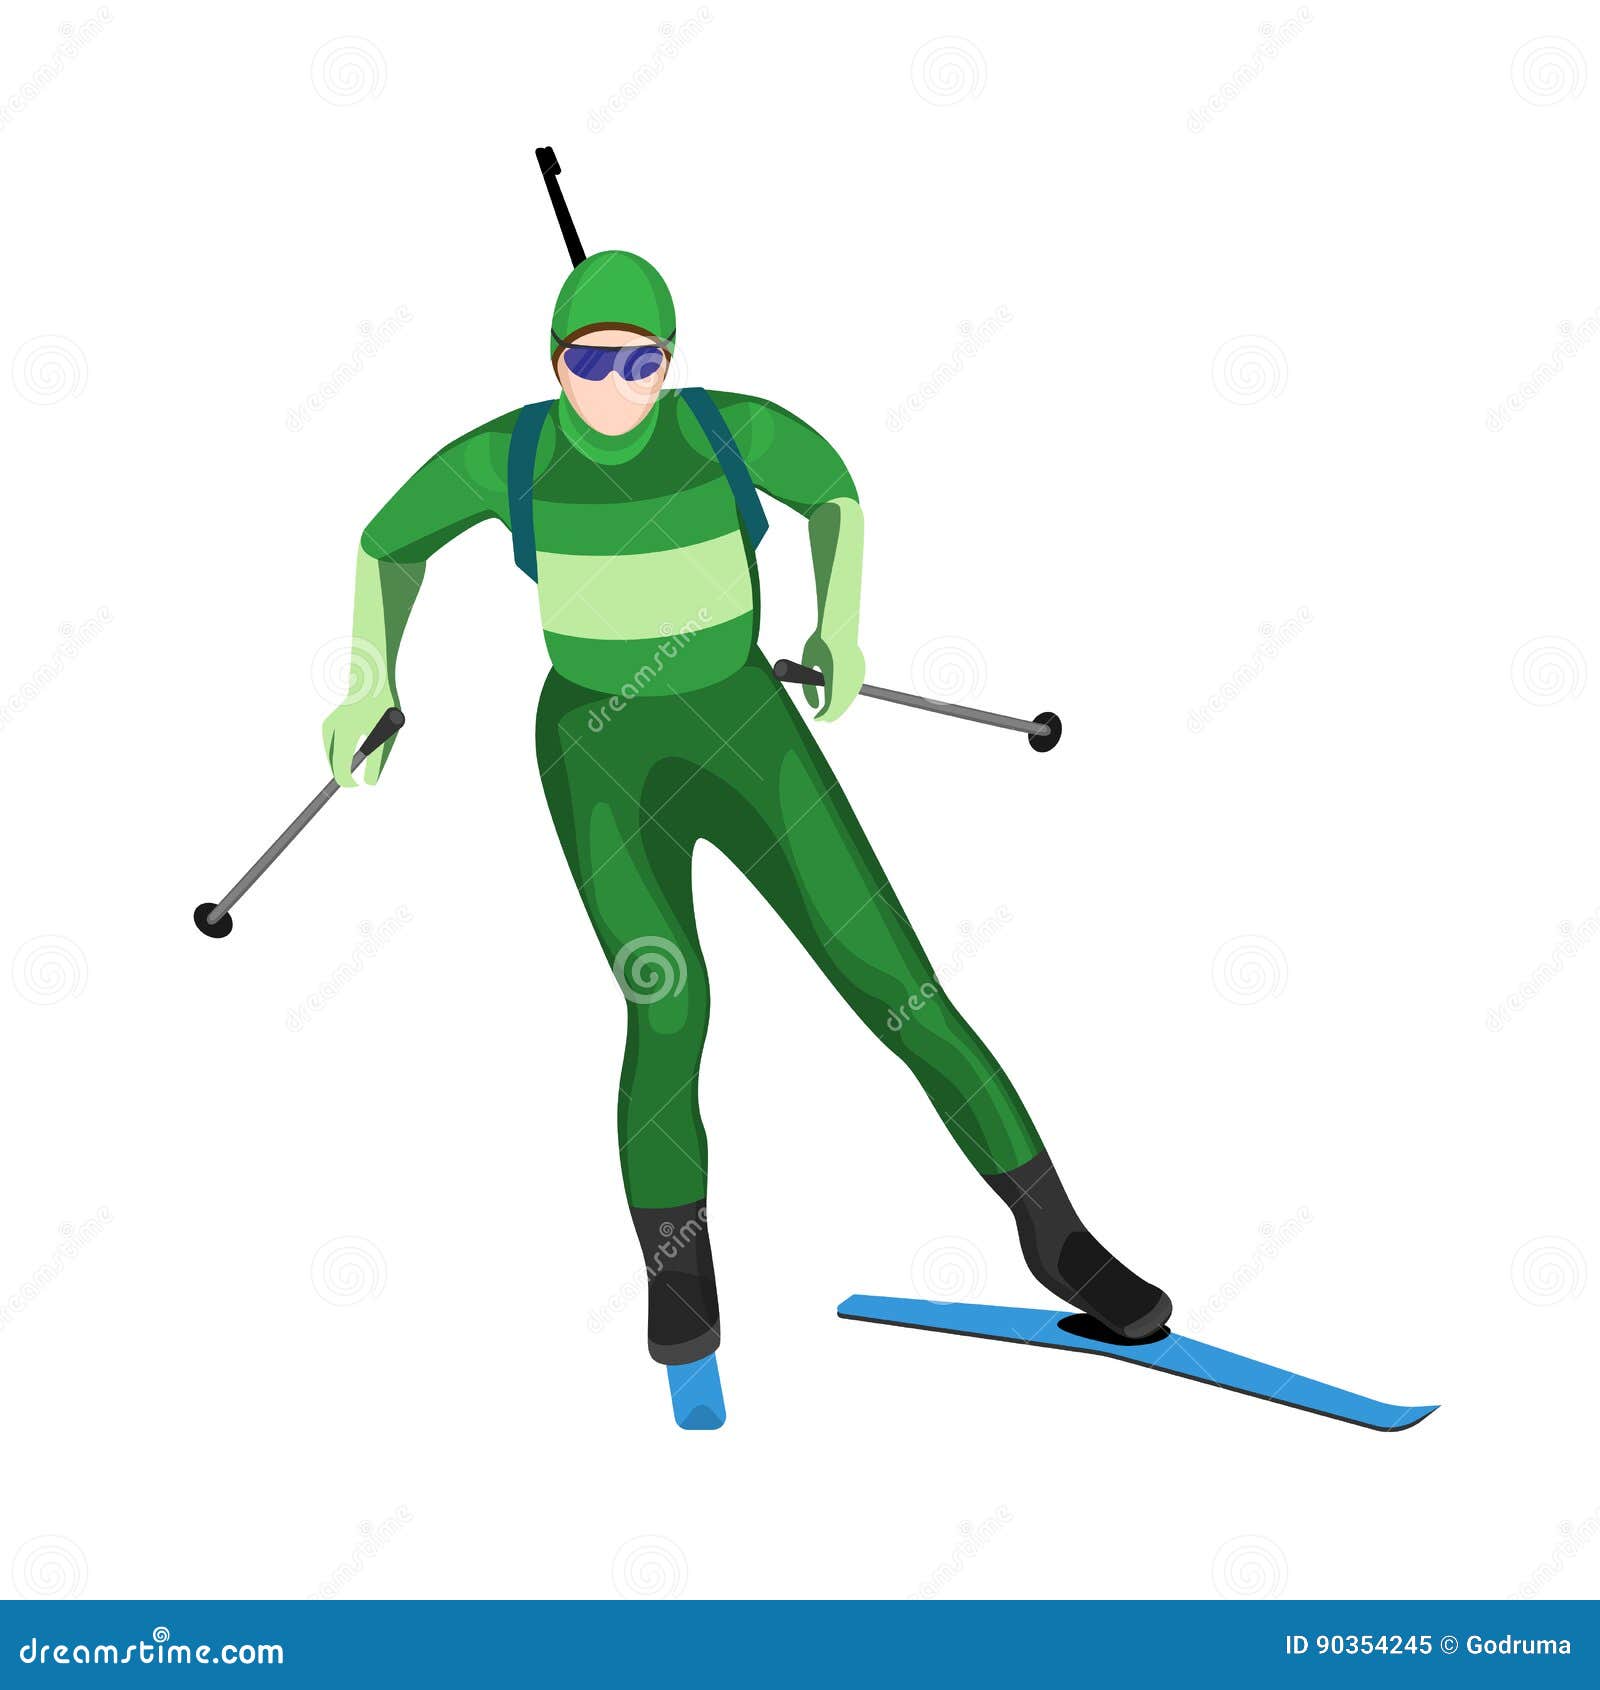 biathlete skier with two lightweight poles on skis with rifle